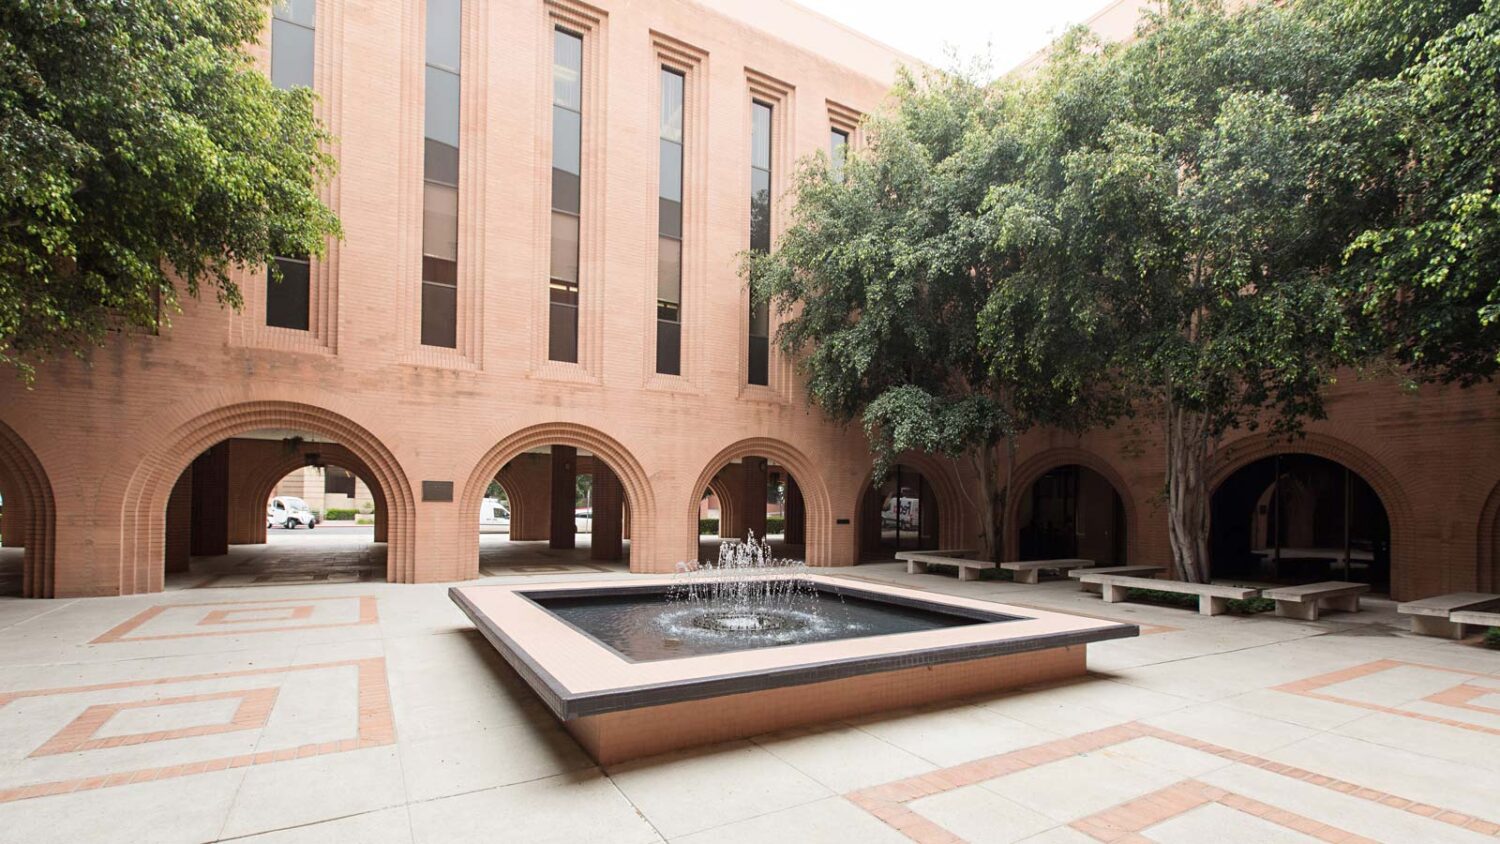 Image of USC Gerontology Courtyard and fountain